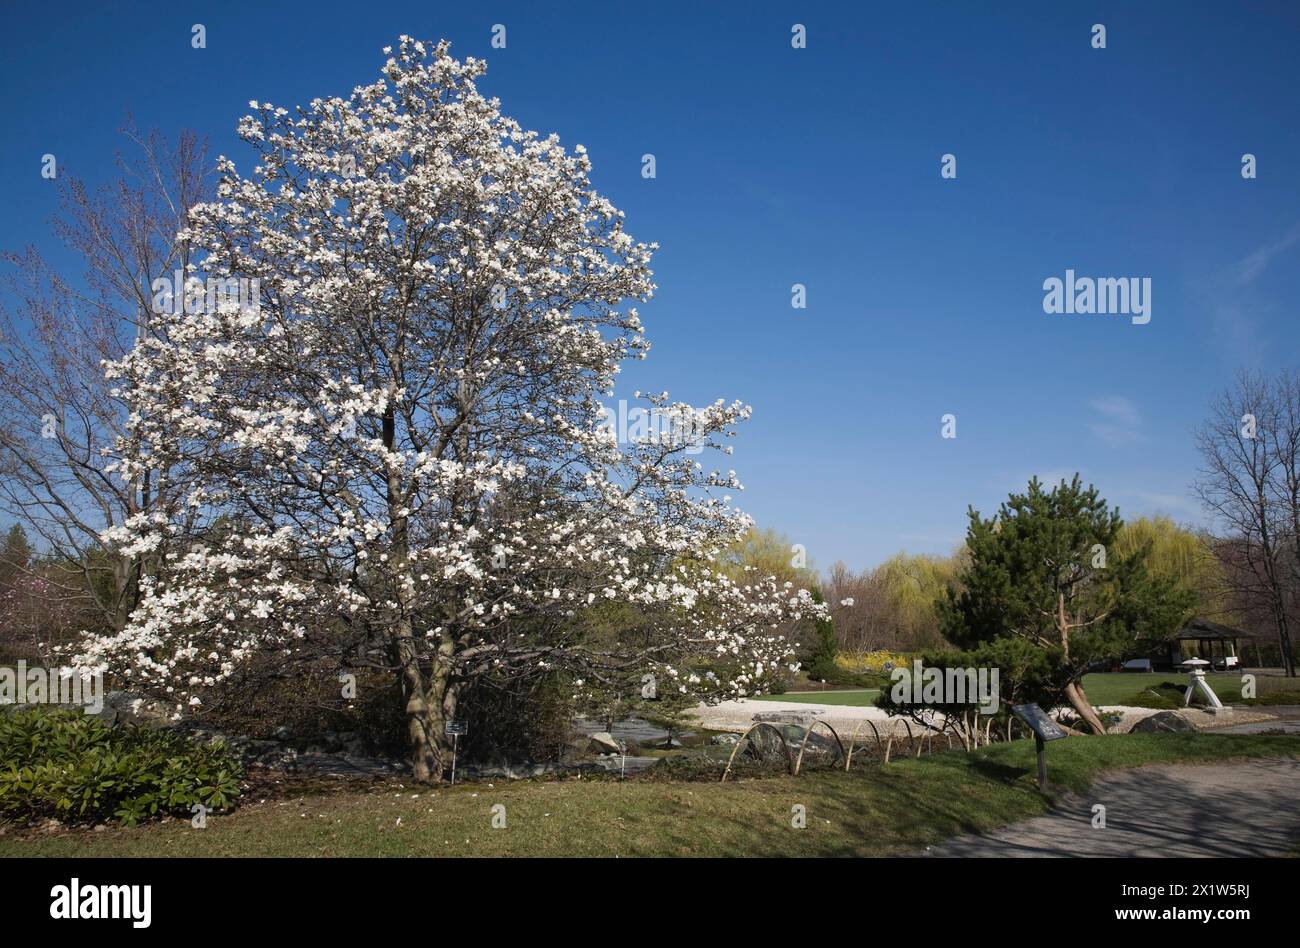 Magnolia loebneri tree with white flower blossoms in full bloom in Japanese garden in spring, Montreal Botanical Garden, Quebec, Canada Stock Photo